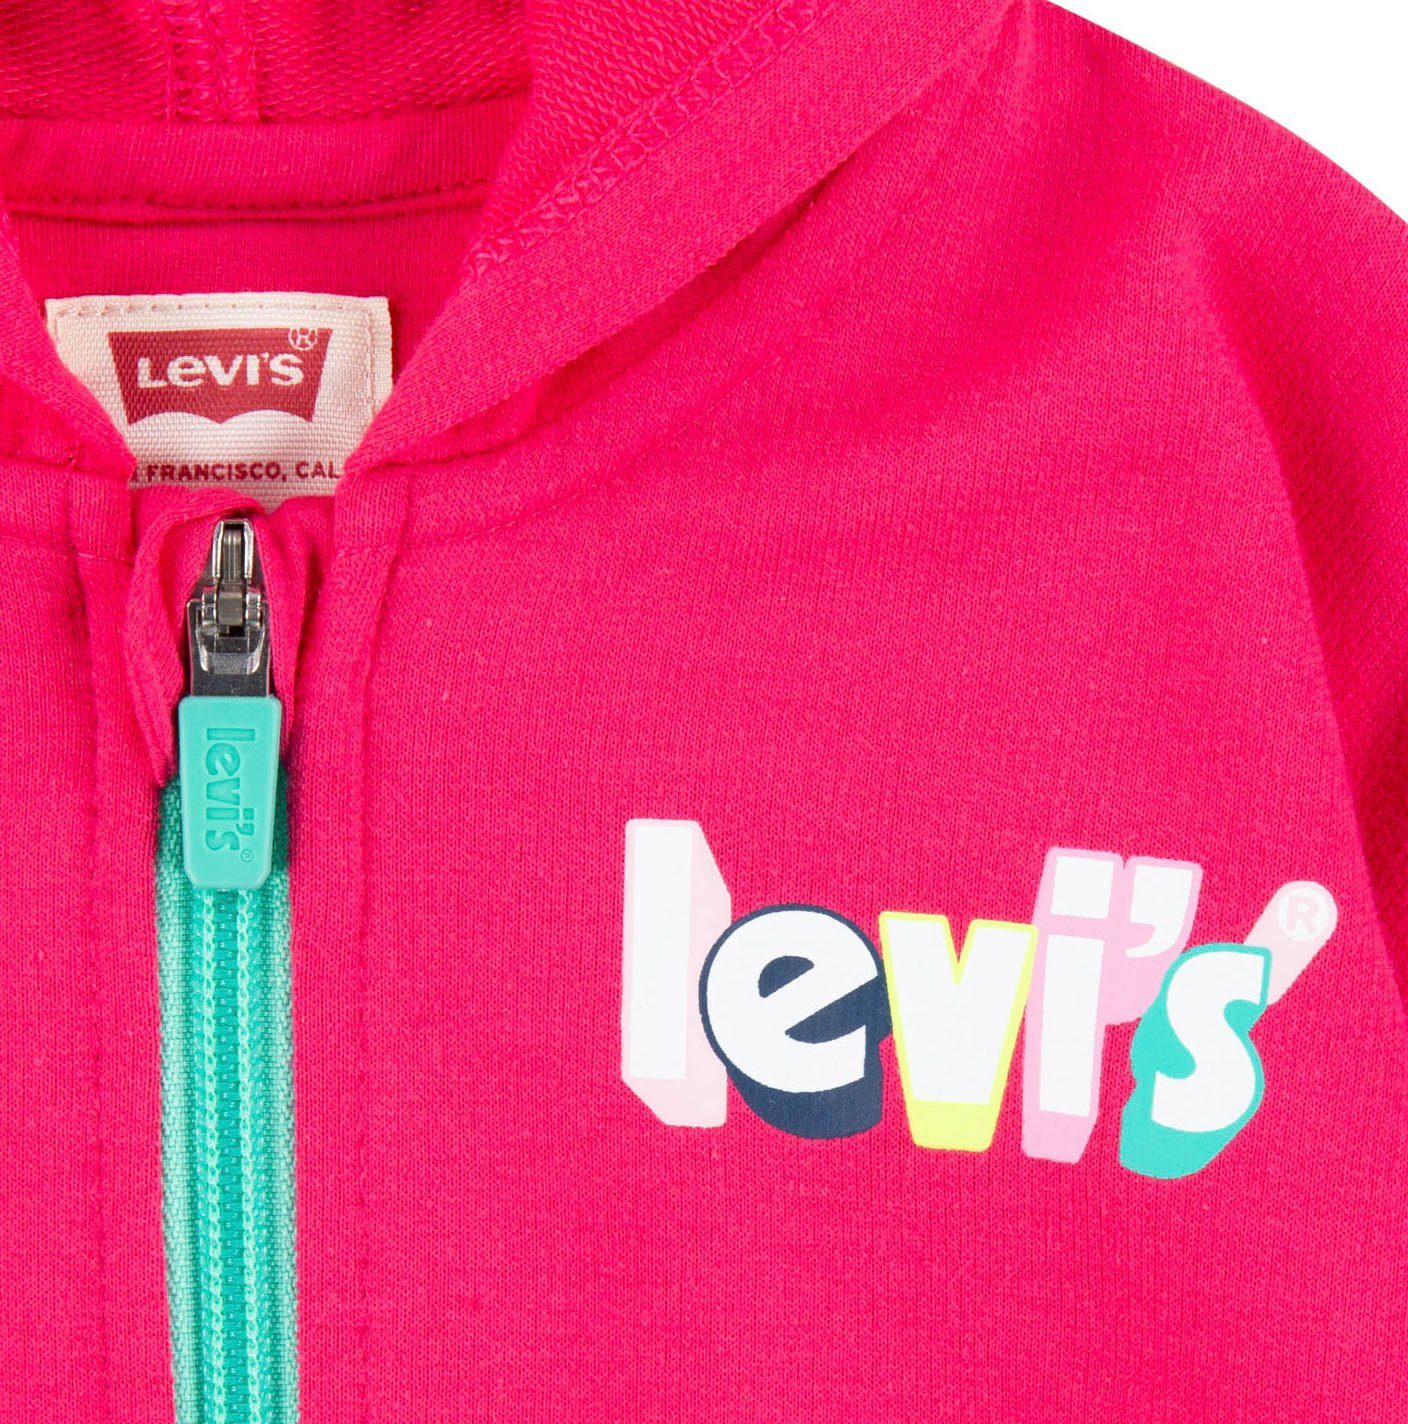 POSTER Levi's® UNISEX pink ALL LOGO Overall DAY PLAY Kids